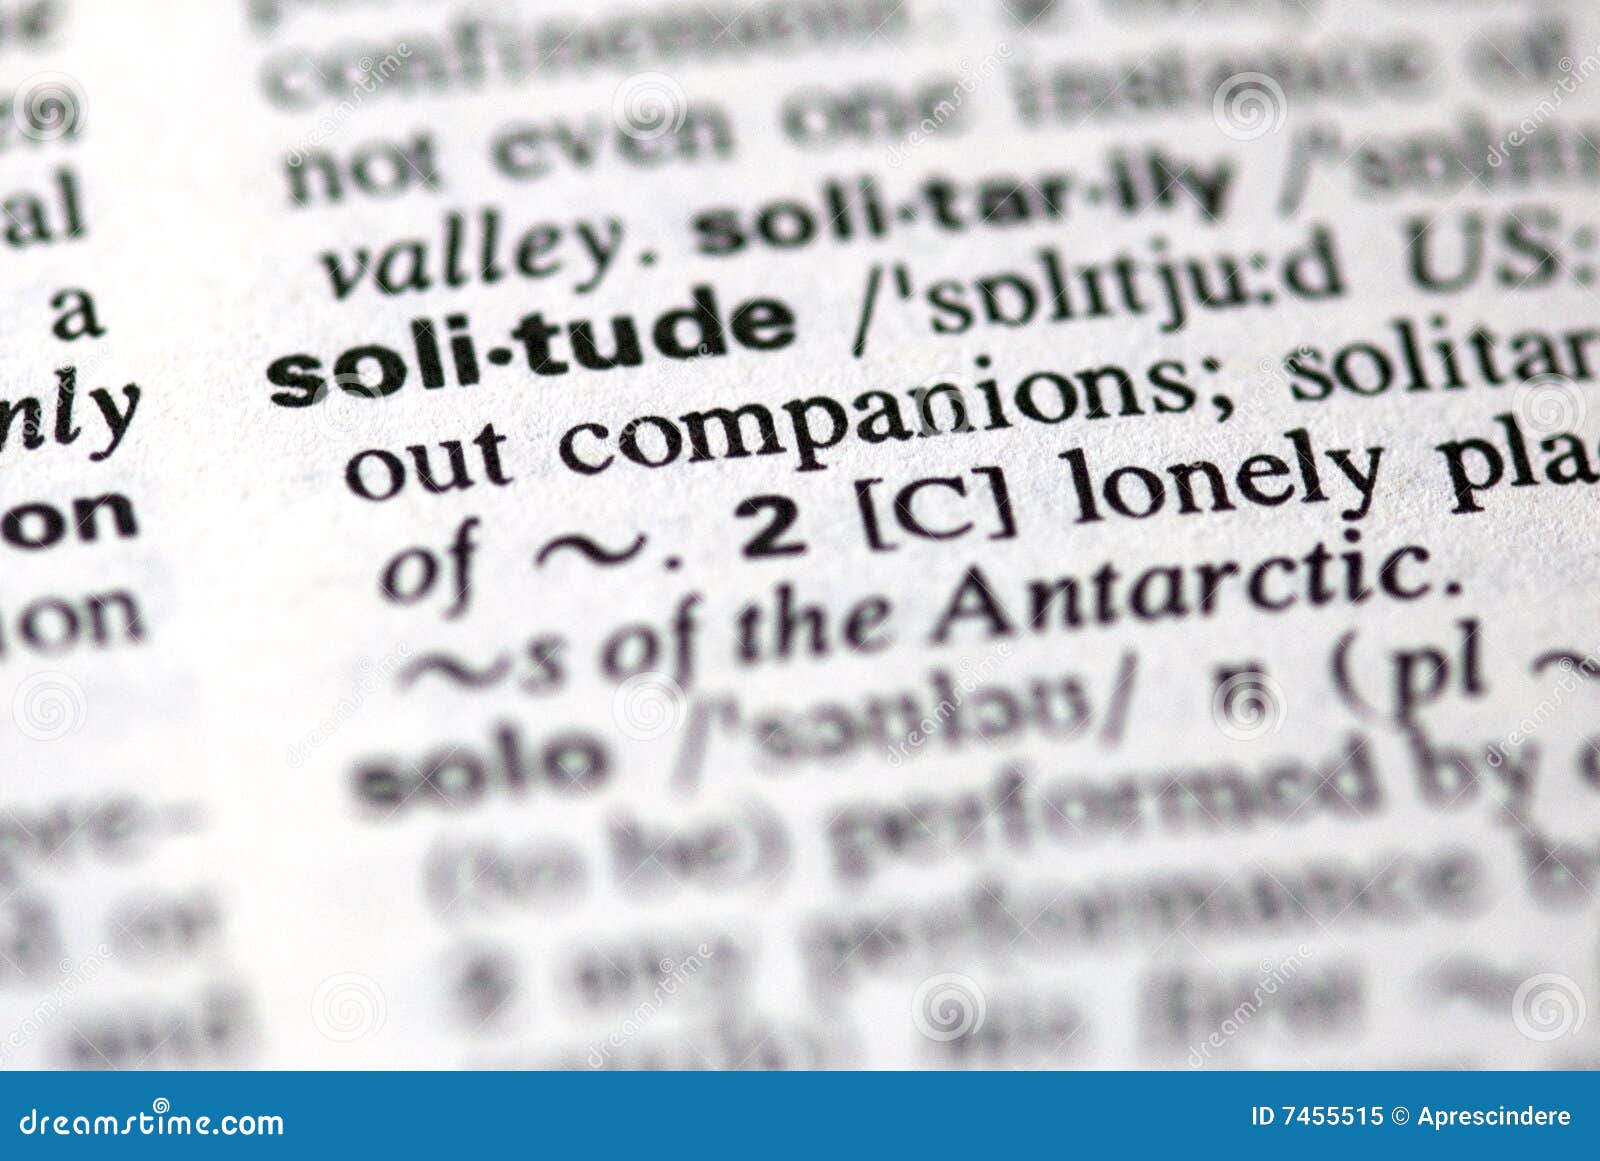 the word solitude in a dictionary